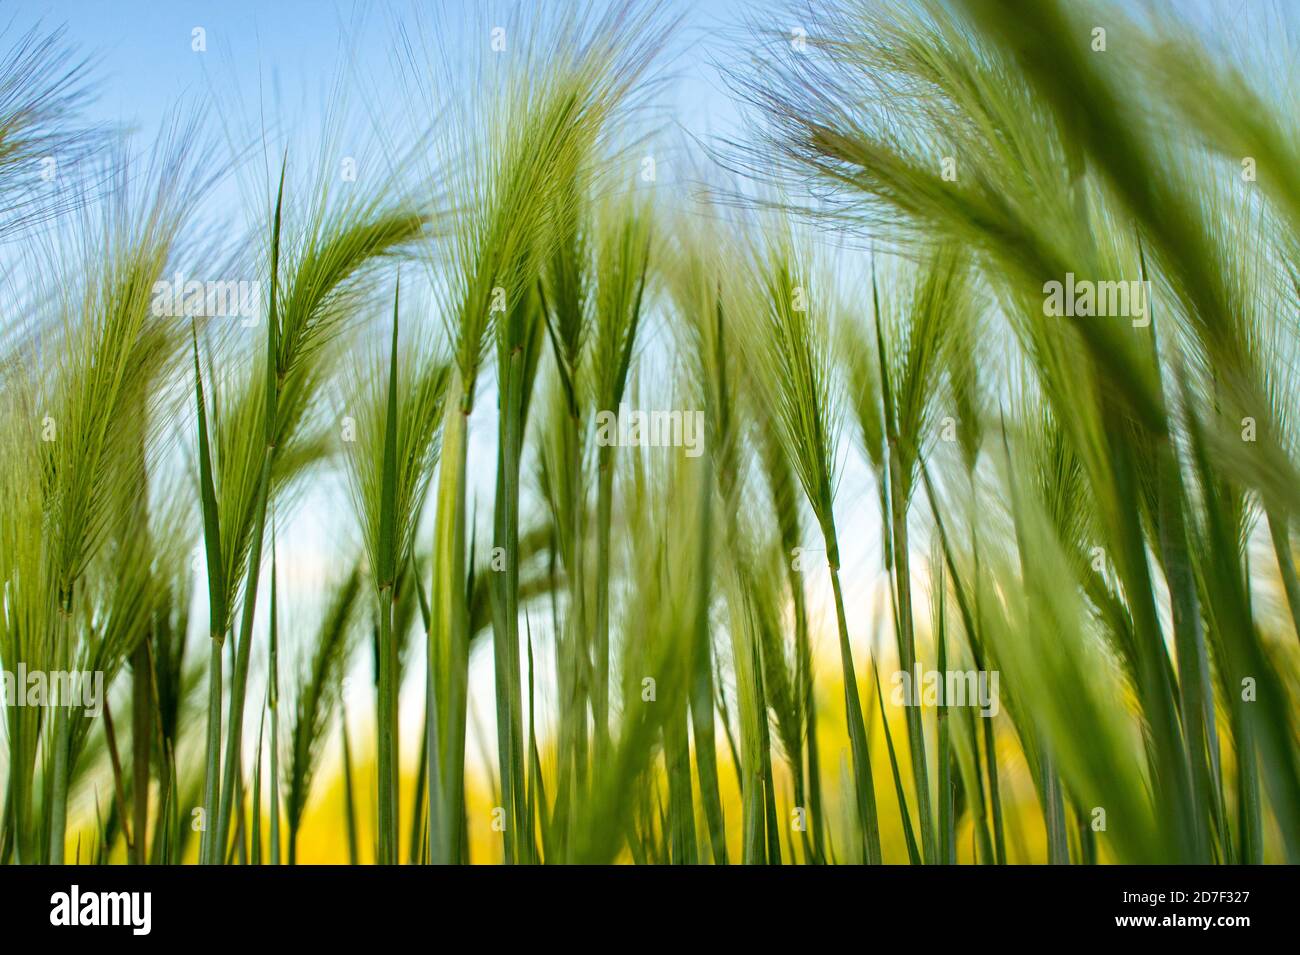 Background of fluffy spikes of green barley close-up. Blue sky and barley grass. Selective focus. Hordeum jubatum, Foxtail barley Stock Photo